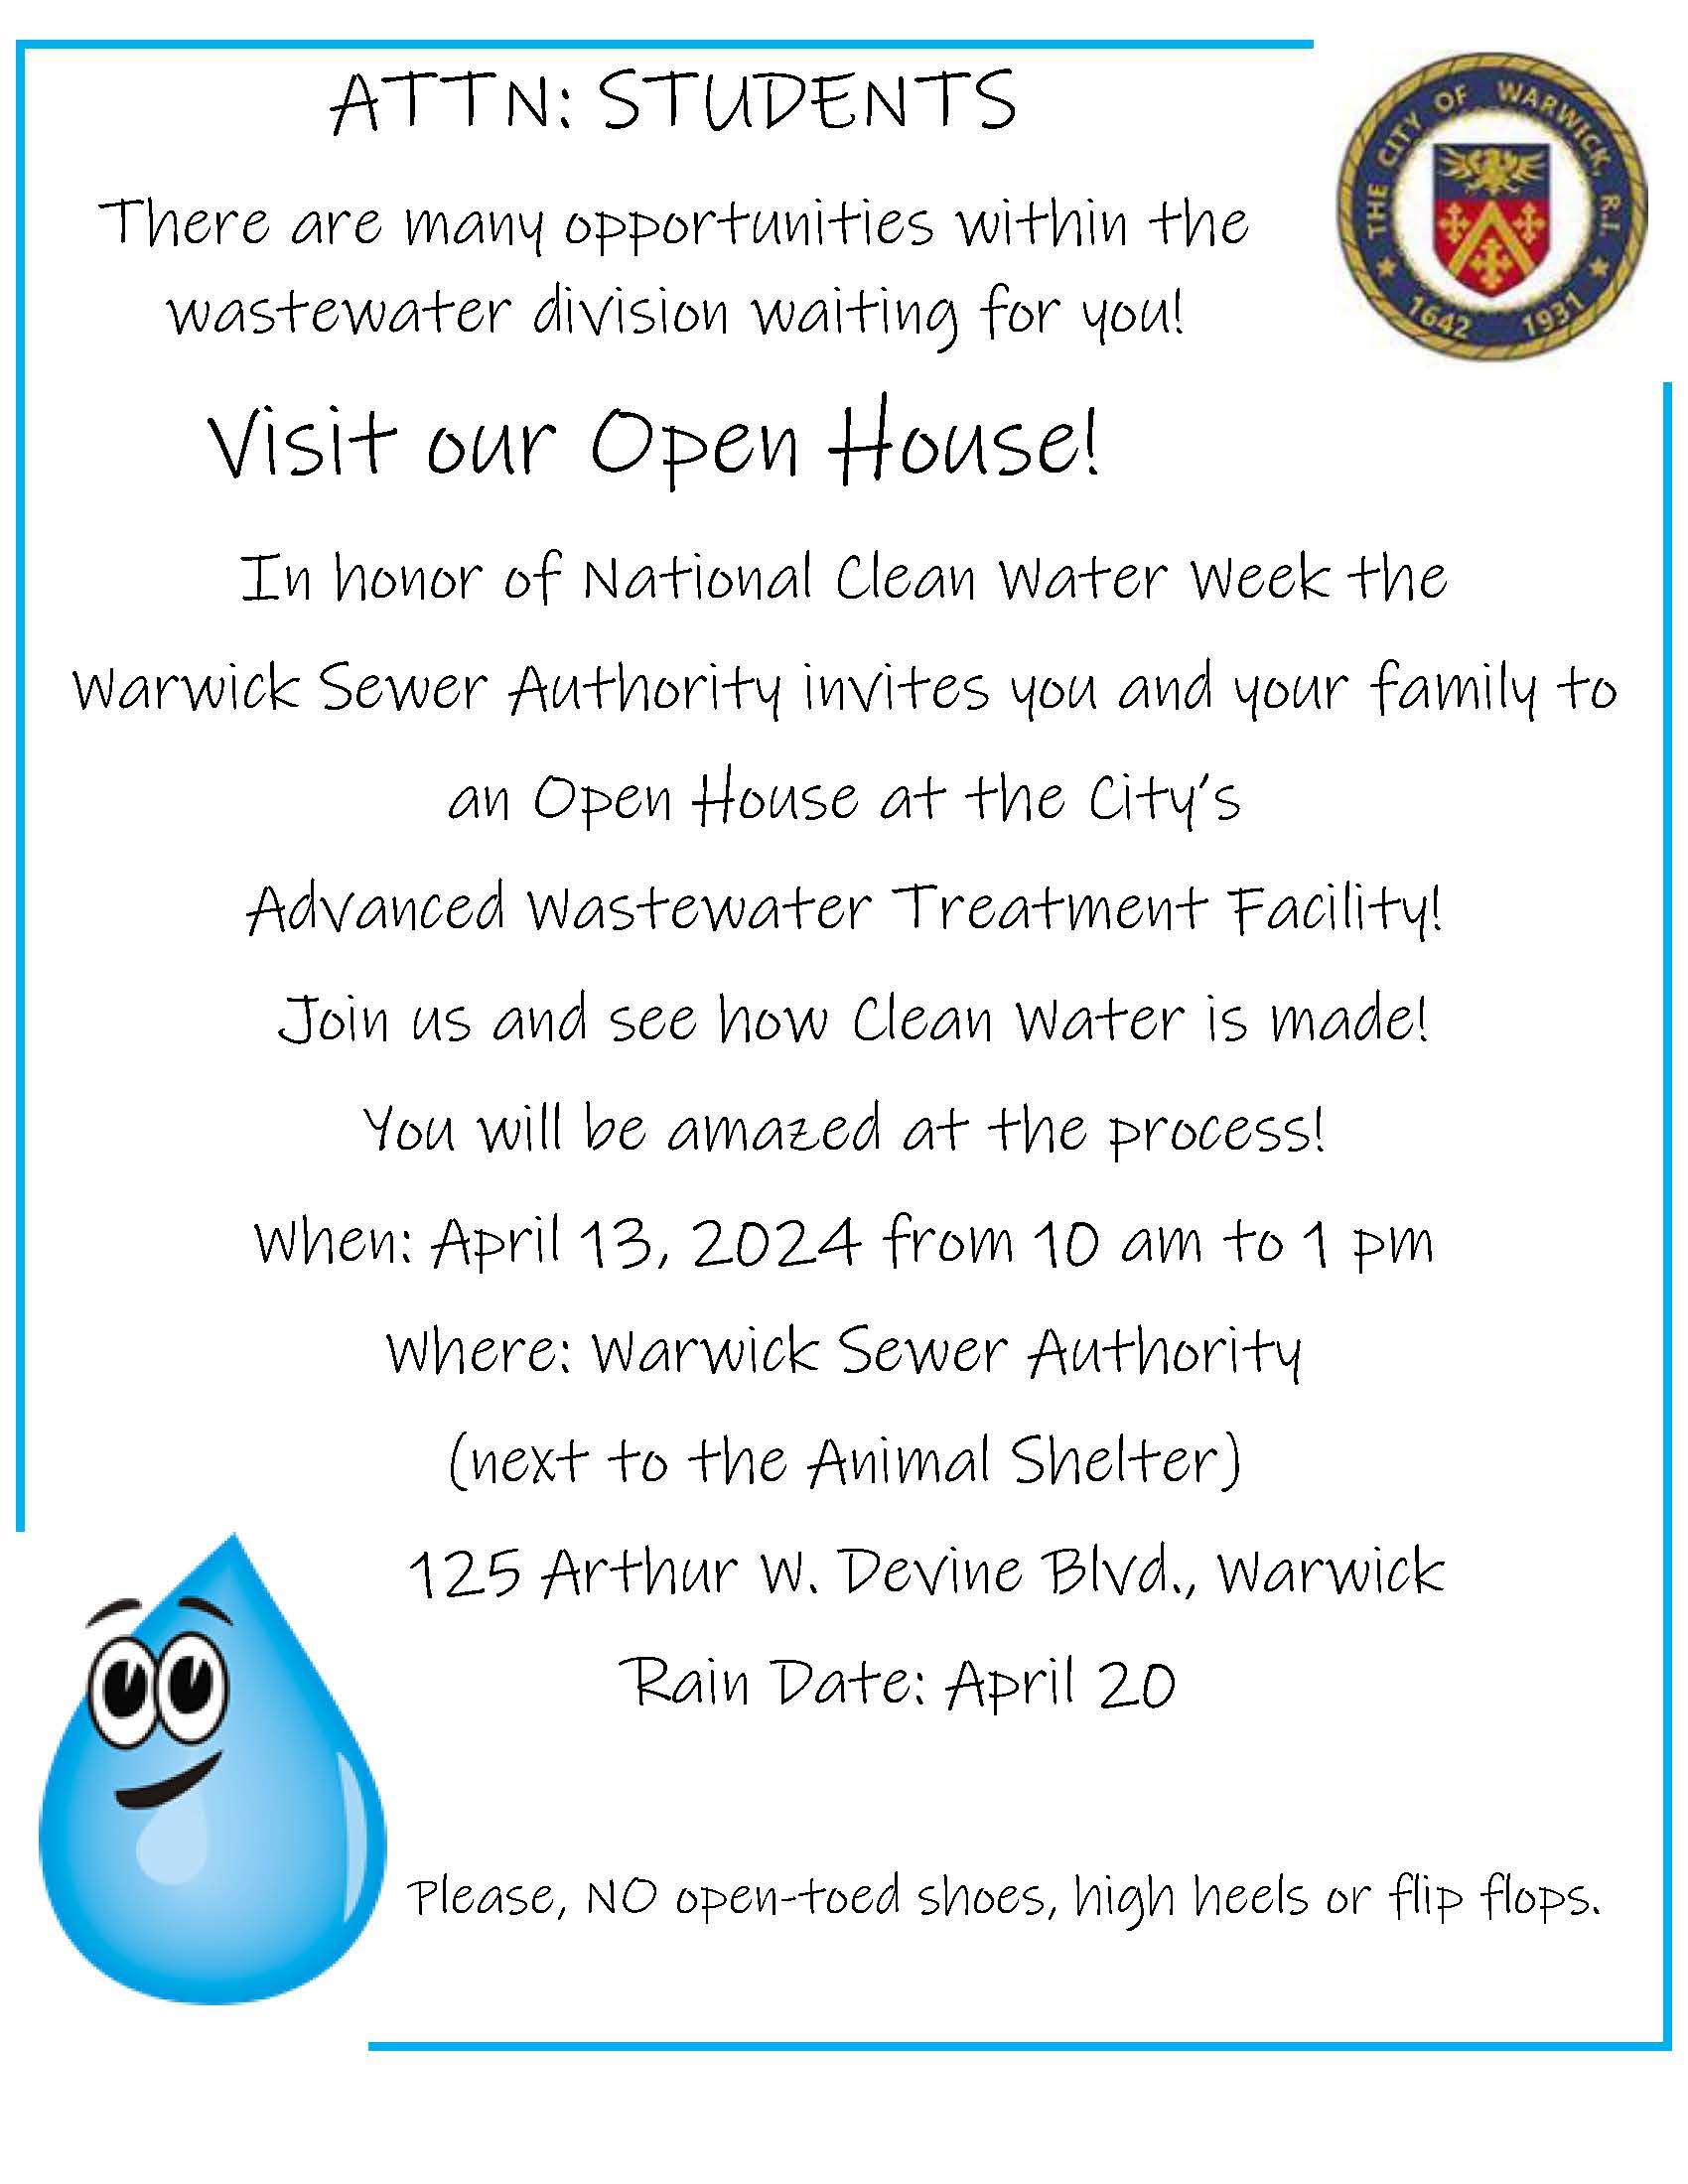 Warwick Sewar Authority Open House FLyer for students